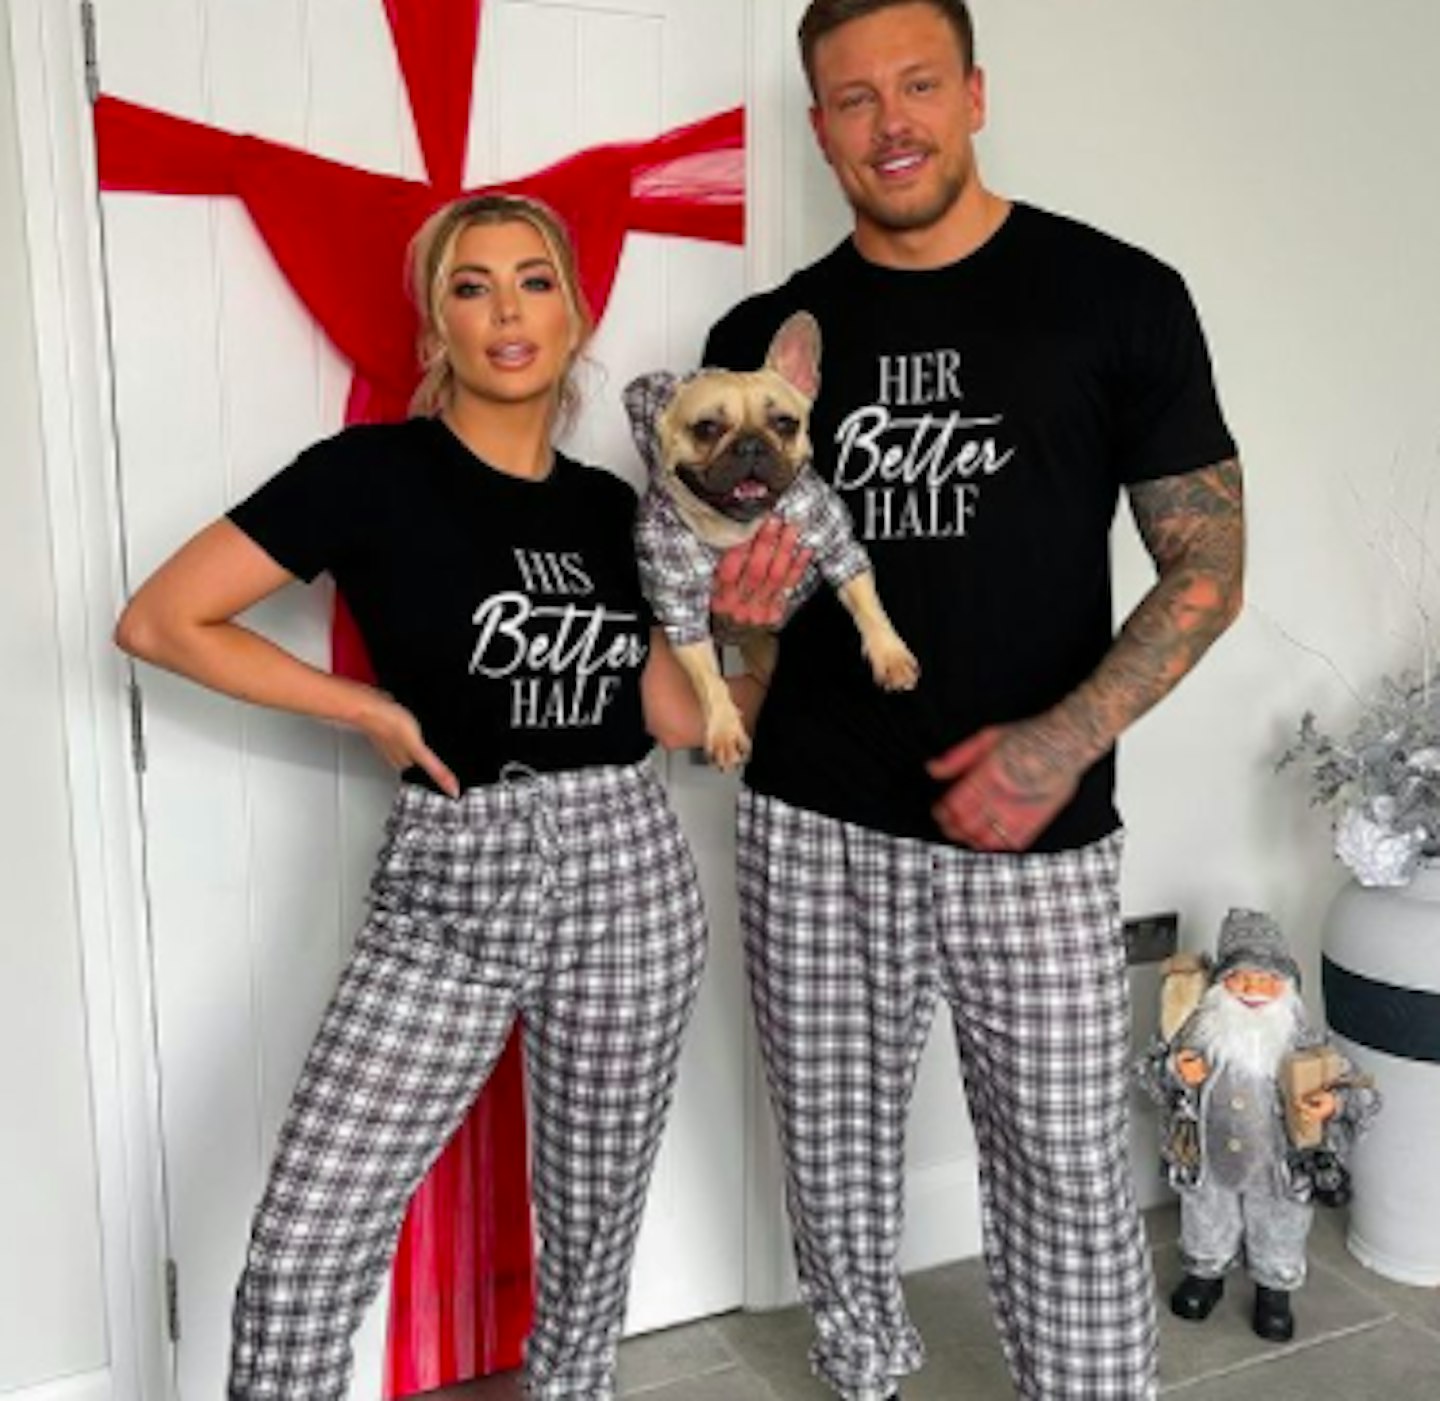 How Much Are UK Reality Couples Making From Instagram?